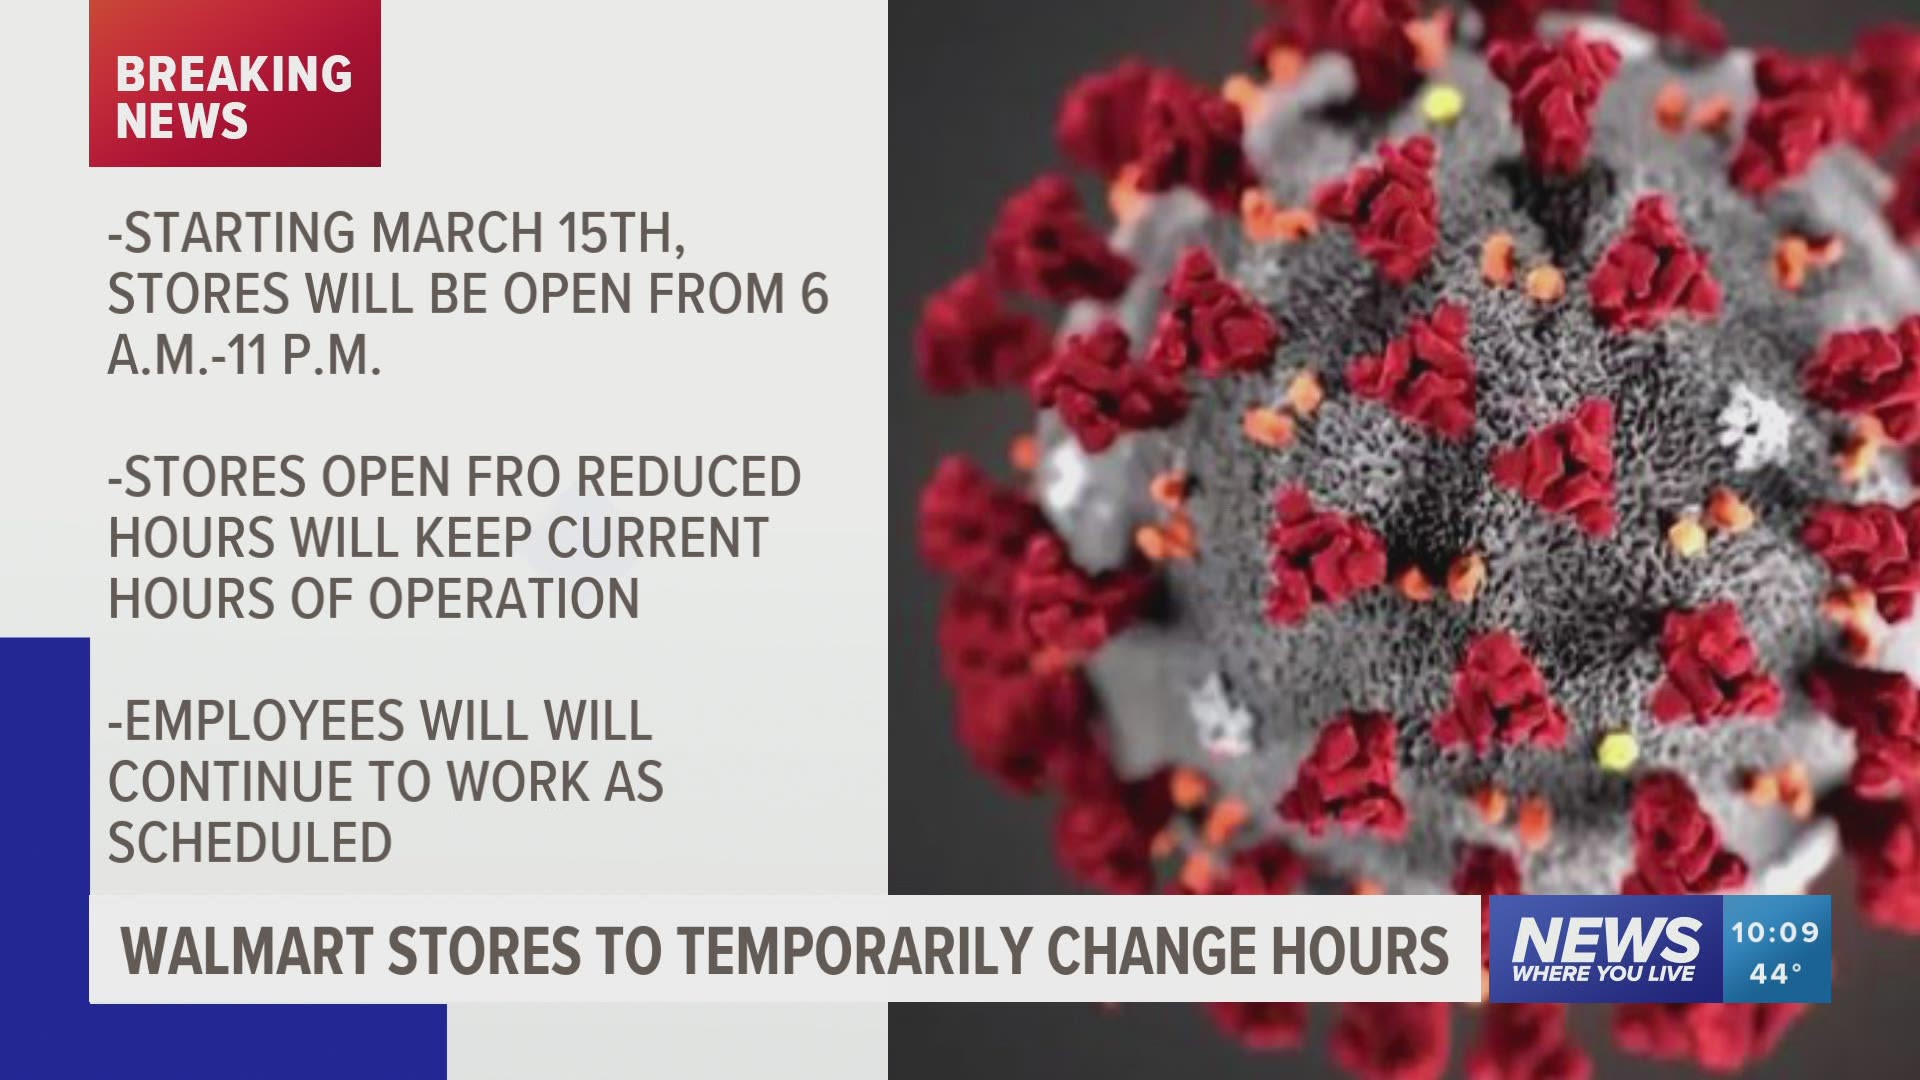 Walmart stores nationwide adjust hours of operation for restocking and sanitizing